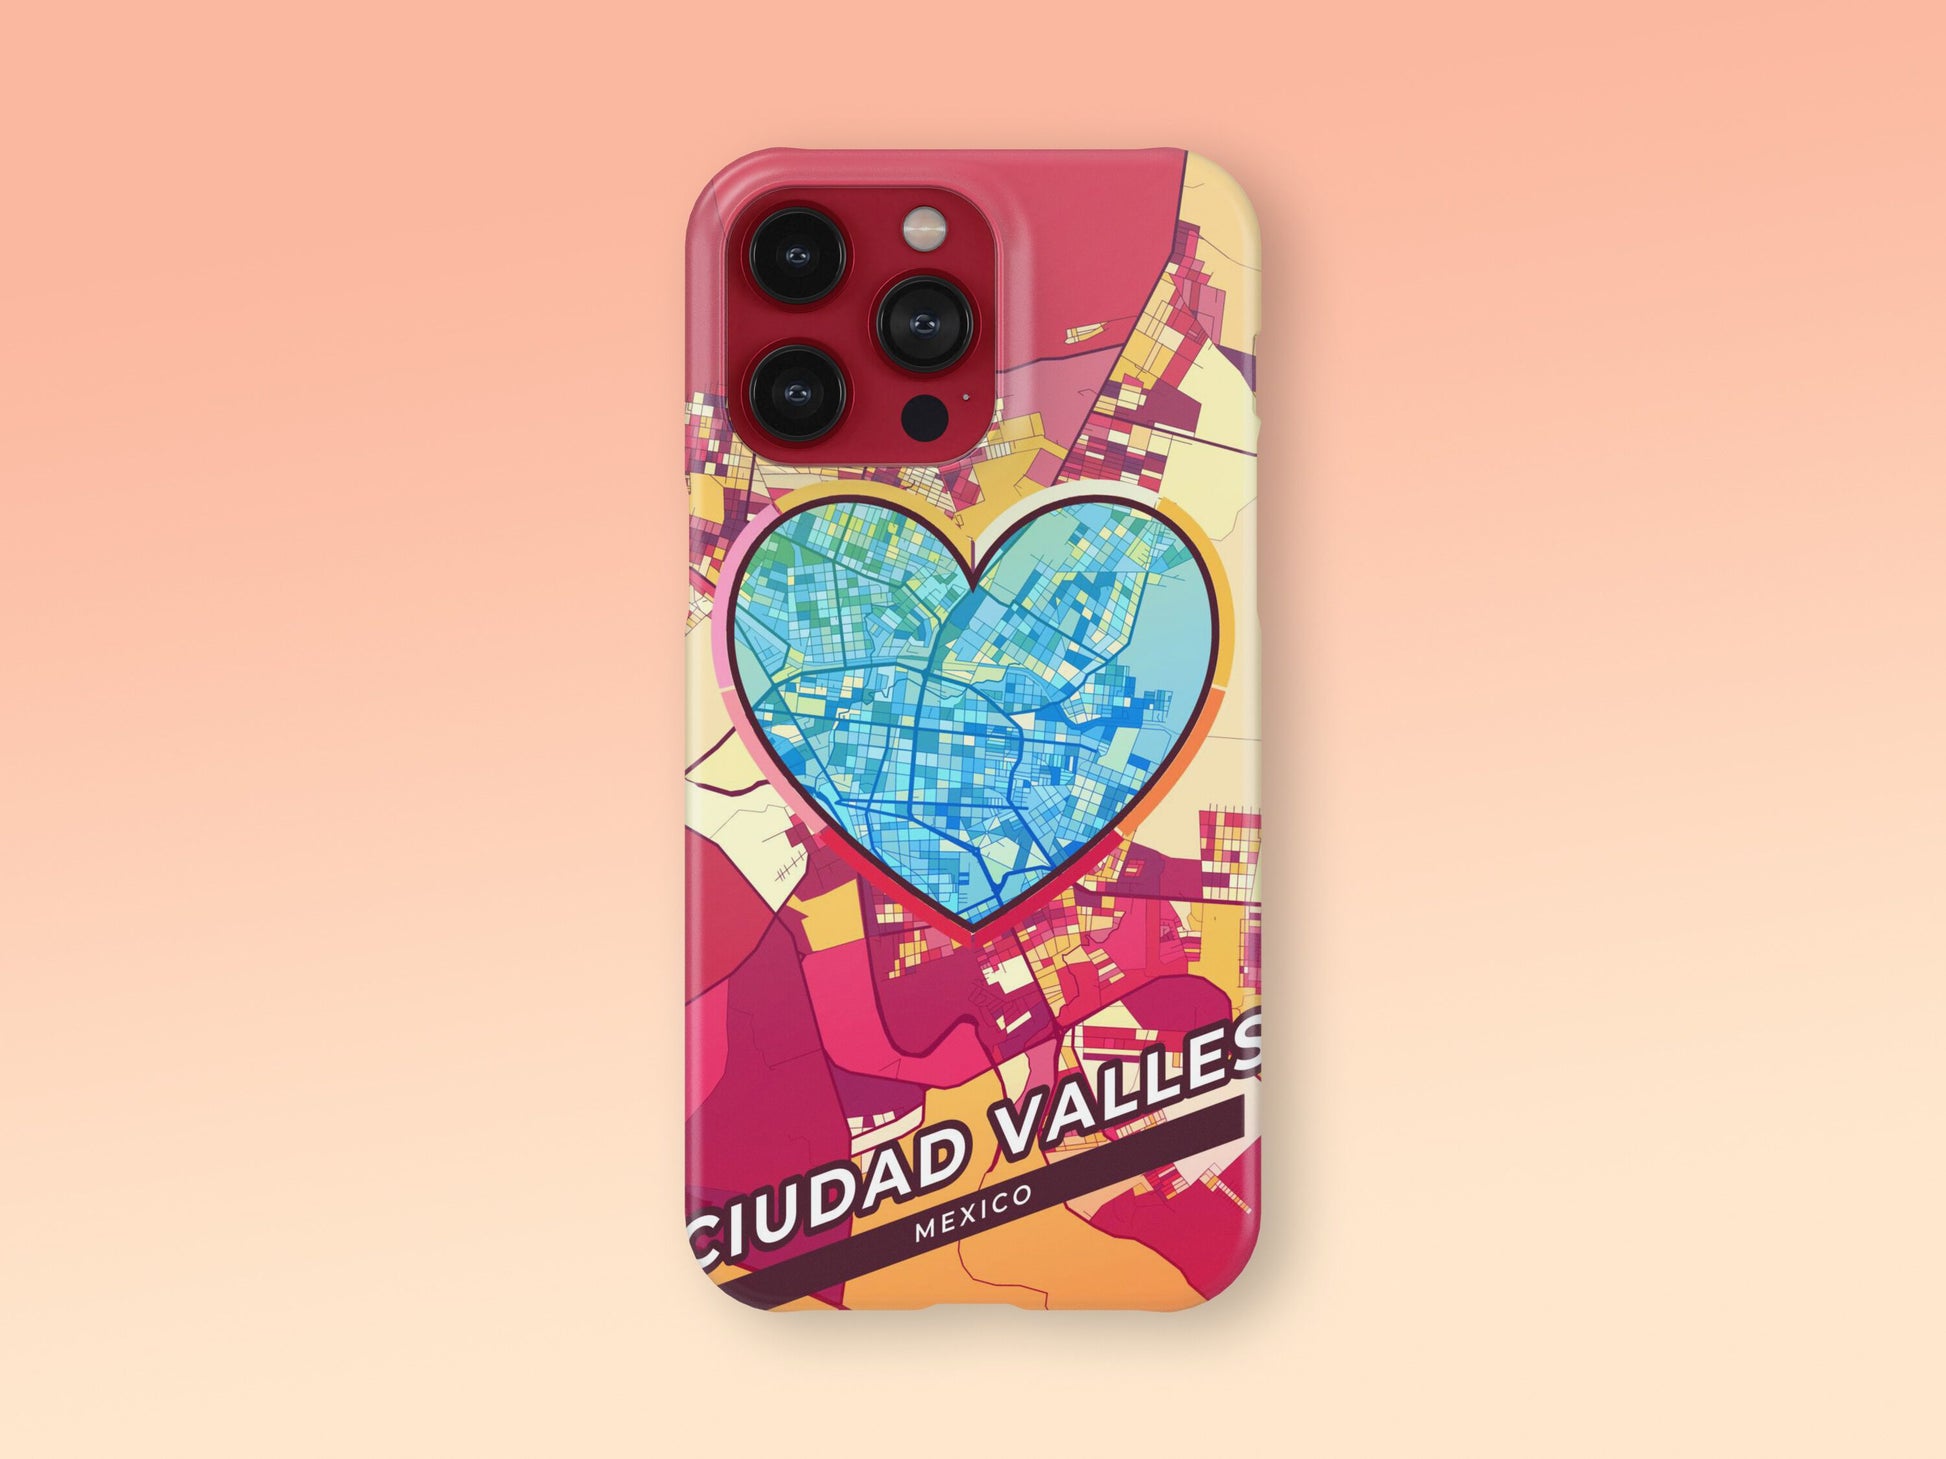 Ciudad Valles Mexico slim phone case with colorful icon. Birthday, wedding or housewarming gift. Couple match cases. 2